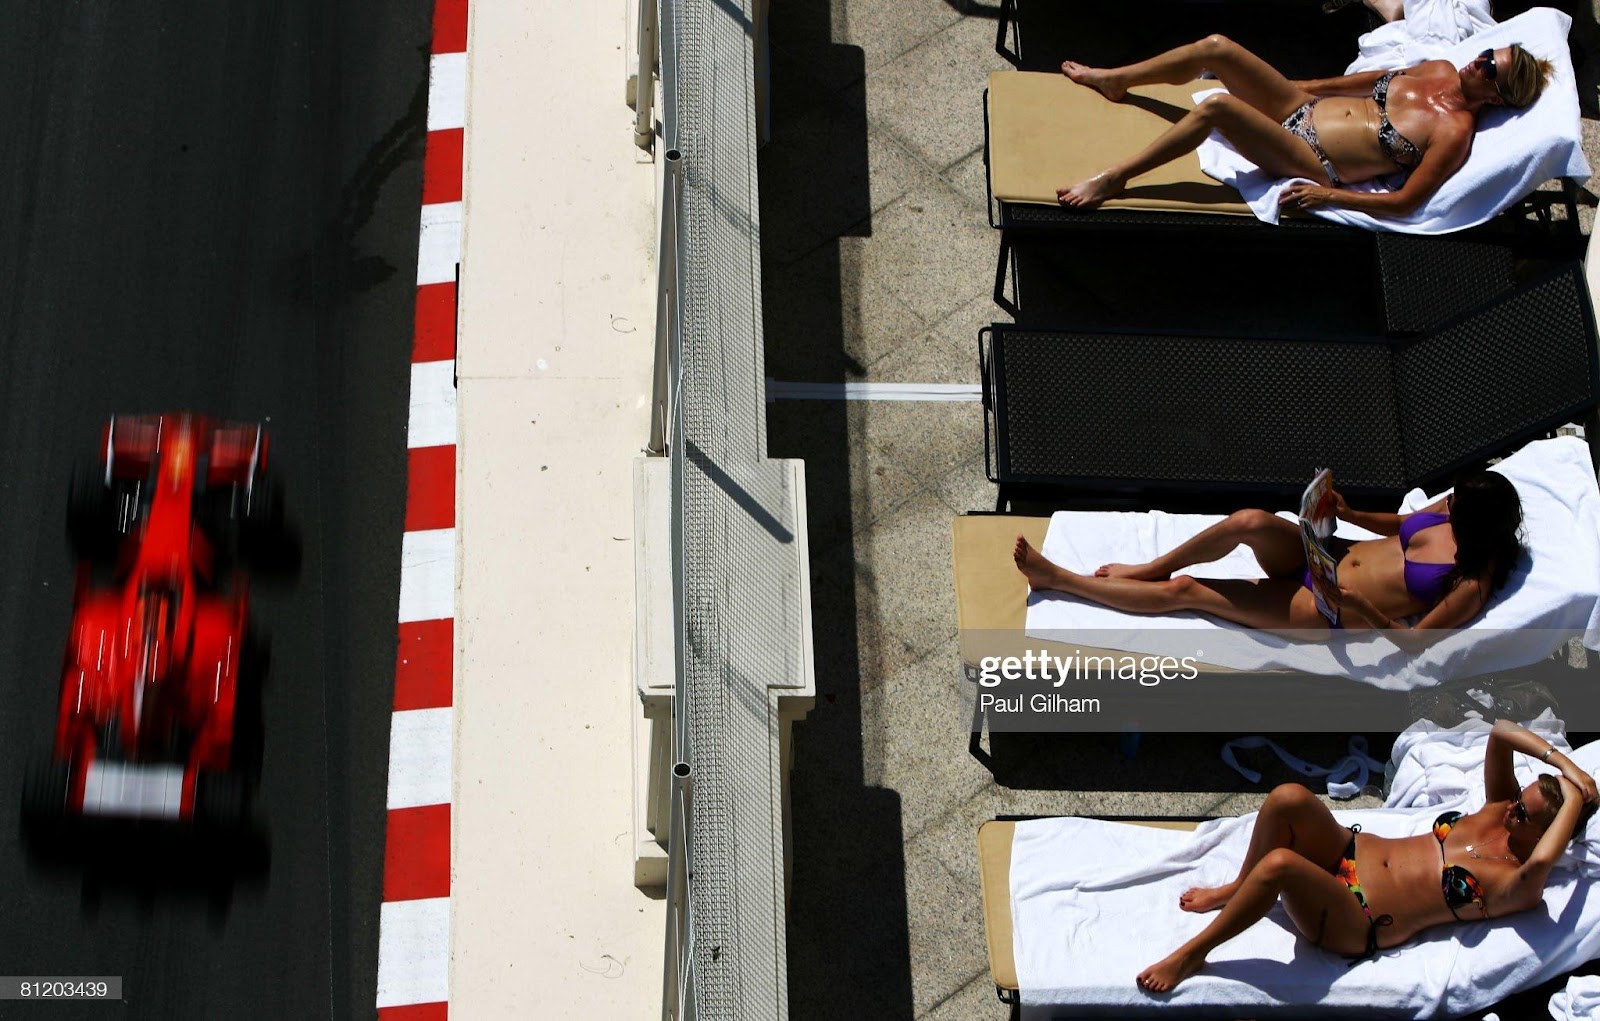 Sunbathers relax as Kimi Raikkonen, Ferrari, drives by during practice for the Monaco F1 Grand Prix at the Monte Carlo Circuit on May 22, 2008.